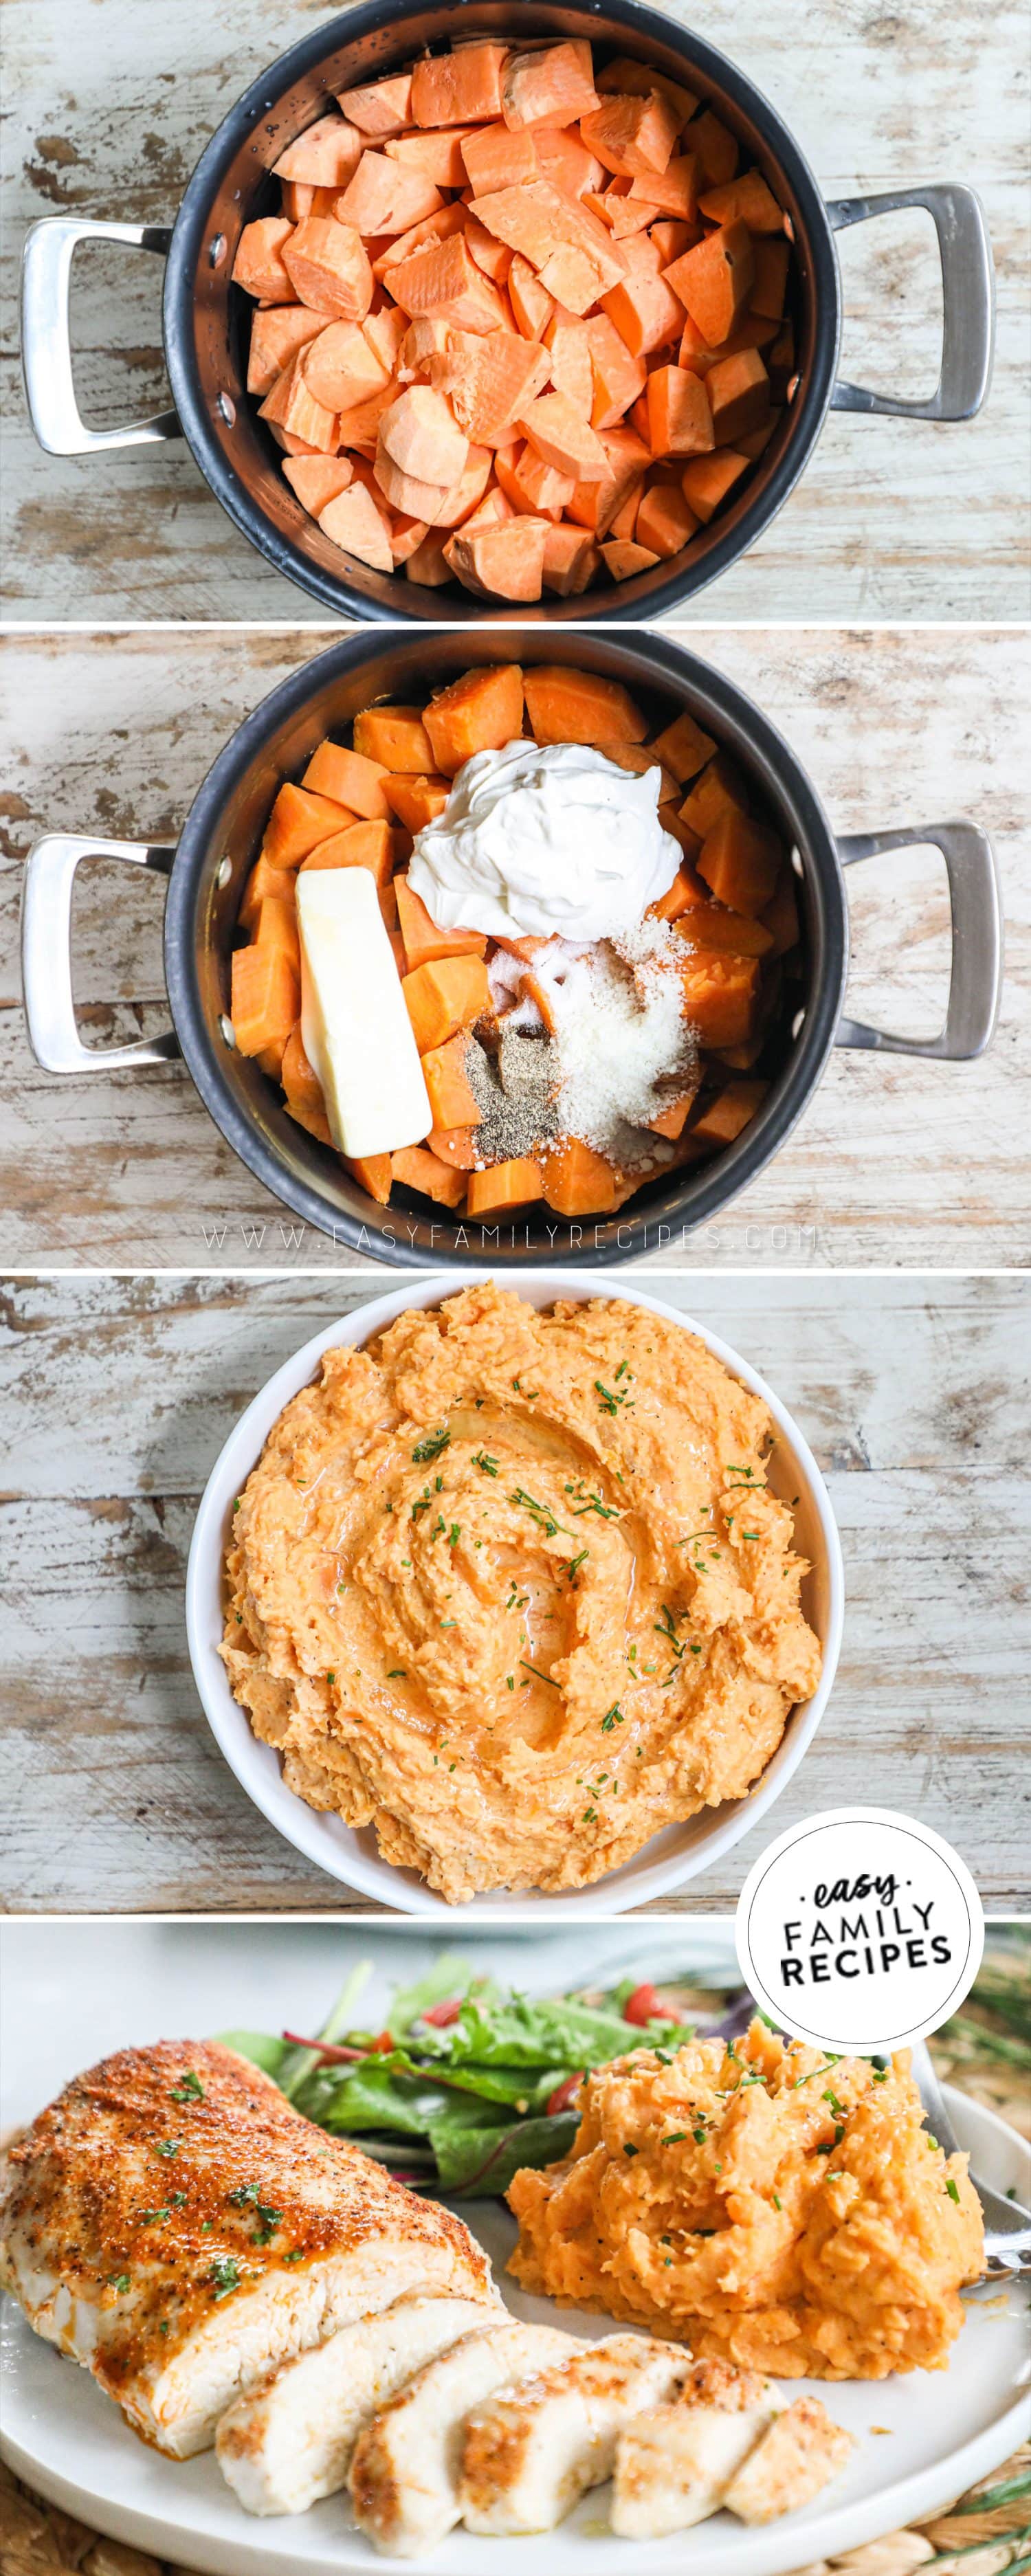 how to make savory mashed sweet potatoes 1)boil the potatoes, 2)add butter, sour cream, parmesan, and seasonings, 3)mash, 4)serve!